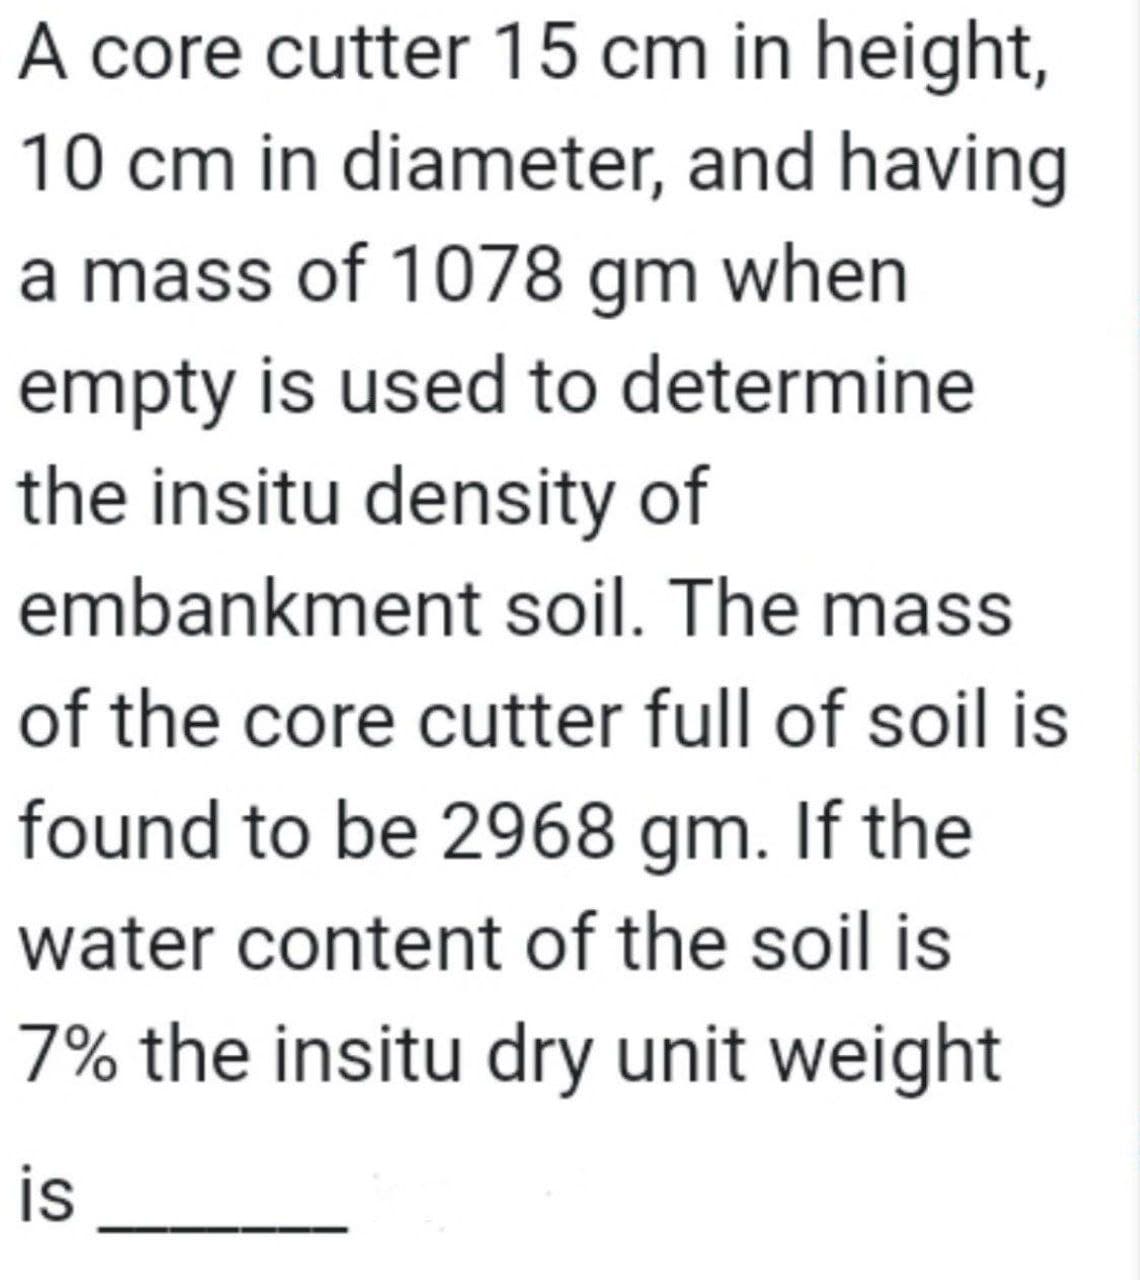 A core cutter 15 cm in height,
10 cm in diameter, and having
a mass of 1078 gm when
empty is used to determine
the insitu density of
embankment soil. The mass
of the core cutter full of soil is
found to be 2968 gm. If the
water content of the soil is
7% the insitu dry unit weight
is